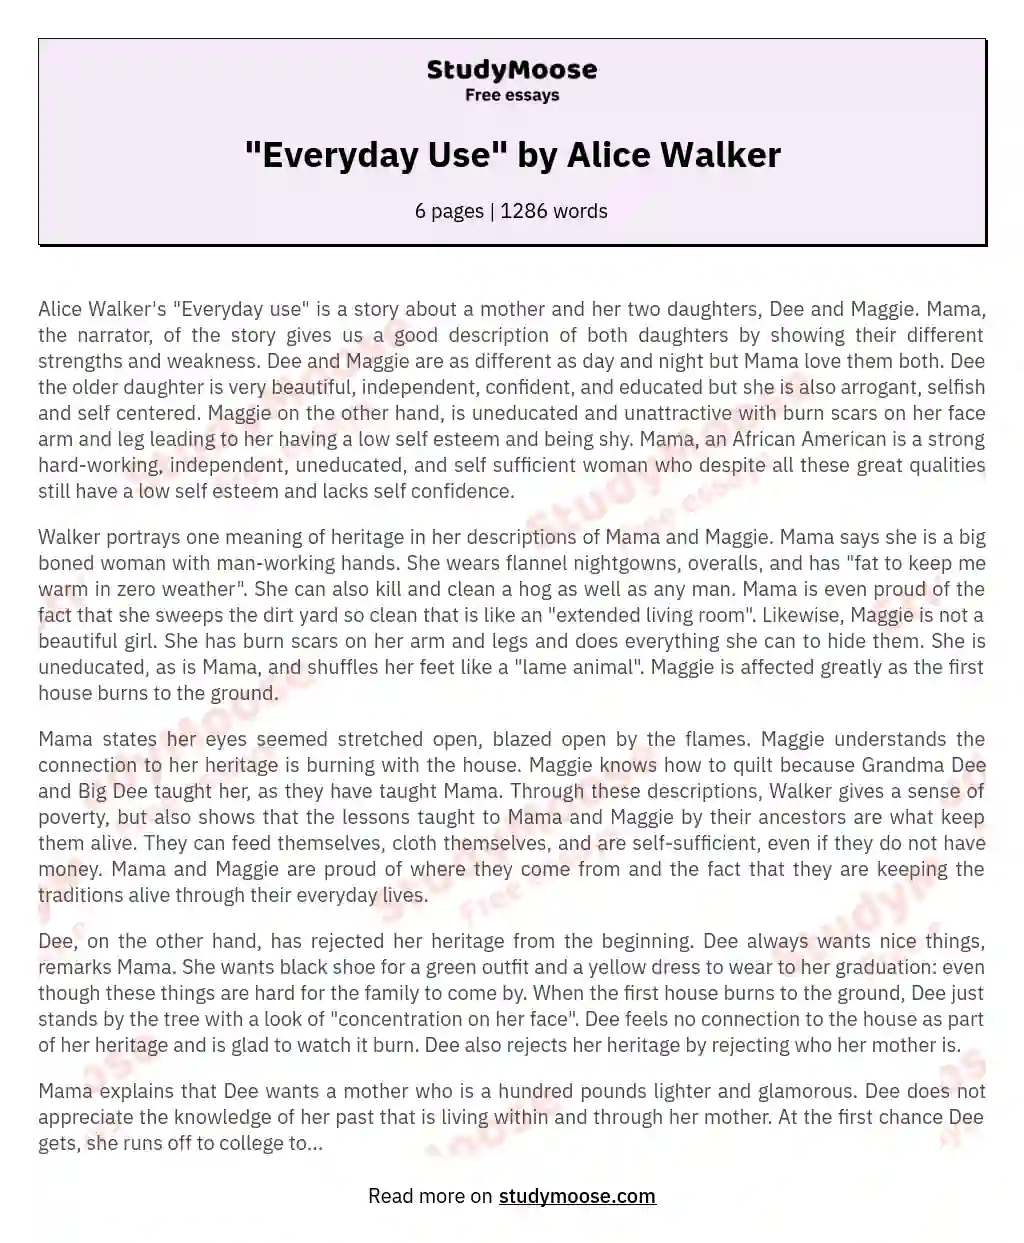 "Everyday Use" by Alice Walker essay